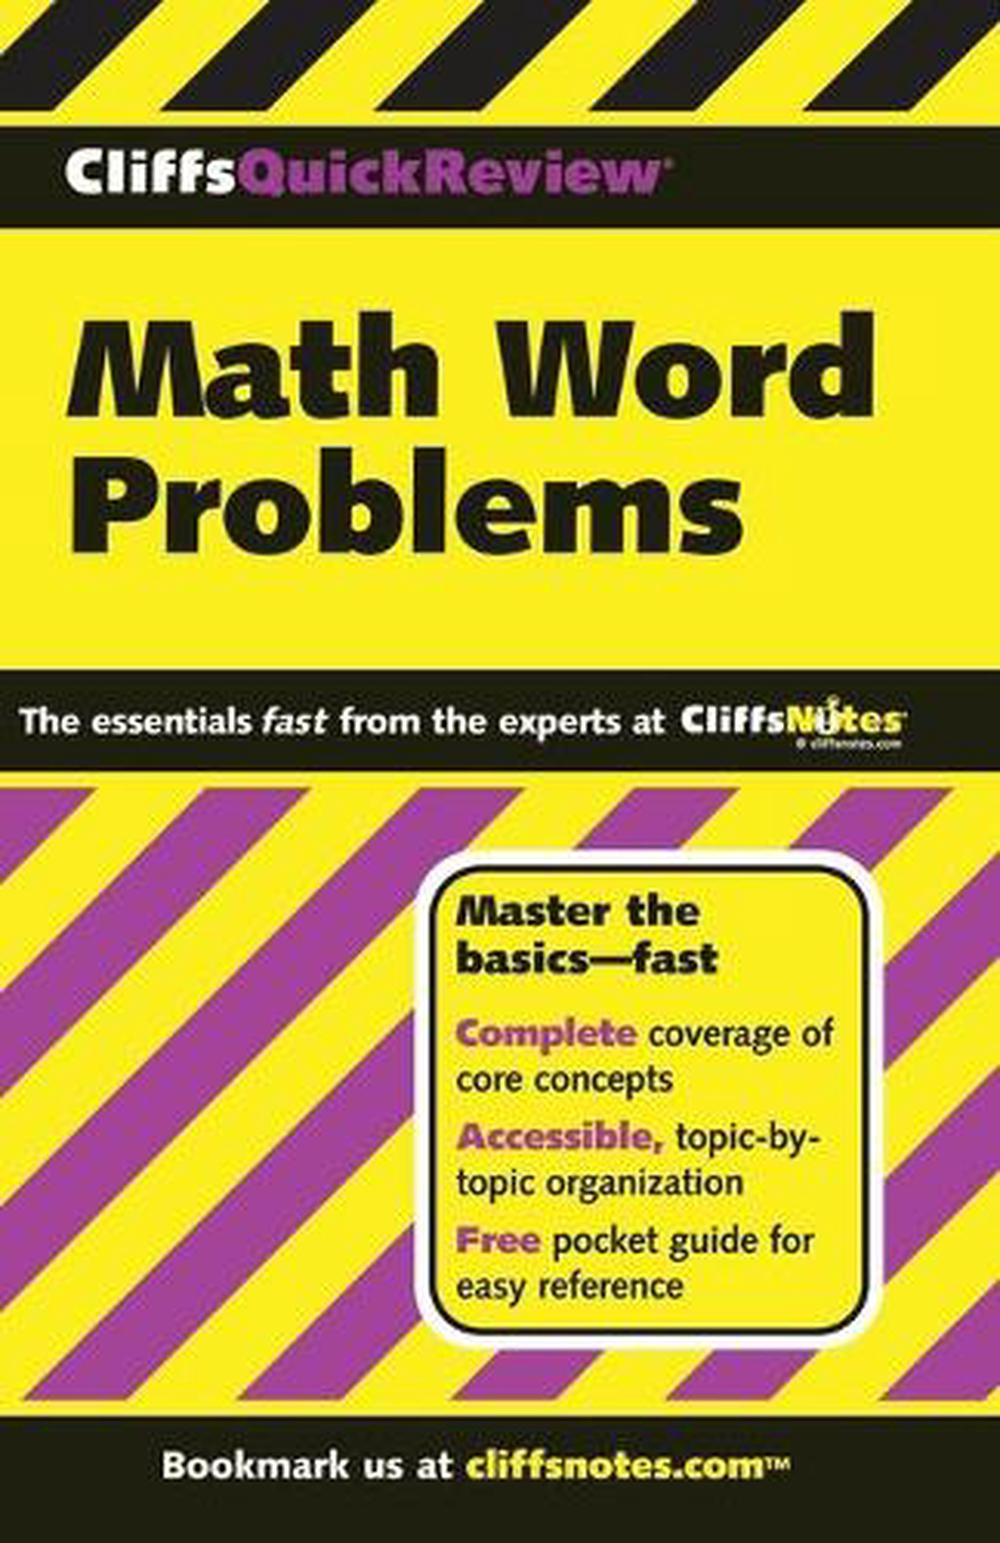 Math Word Problems by Karen L. Anglin (English) Paperback Book Free ...